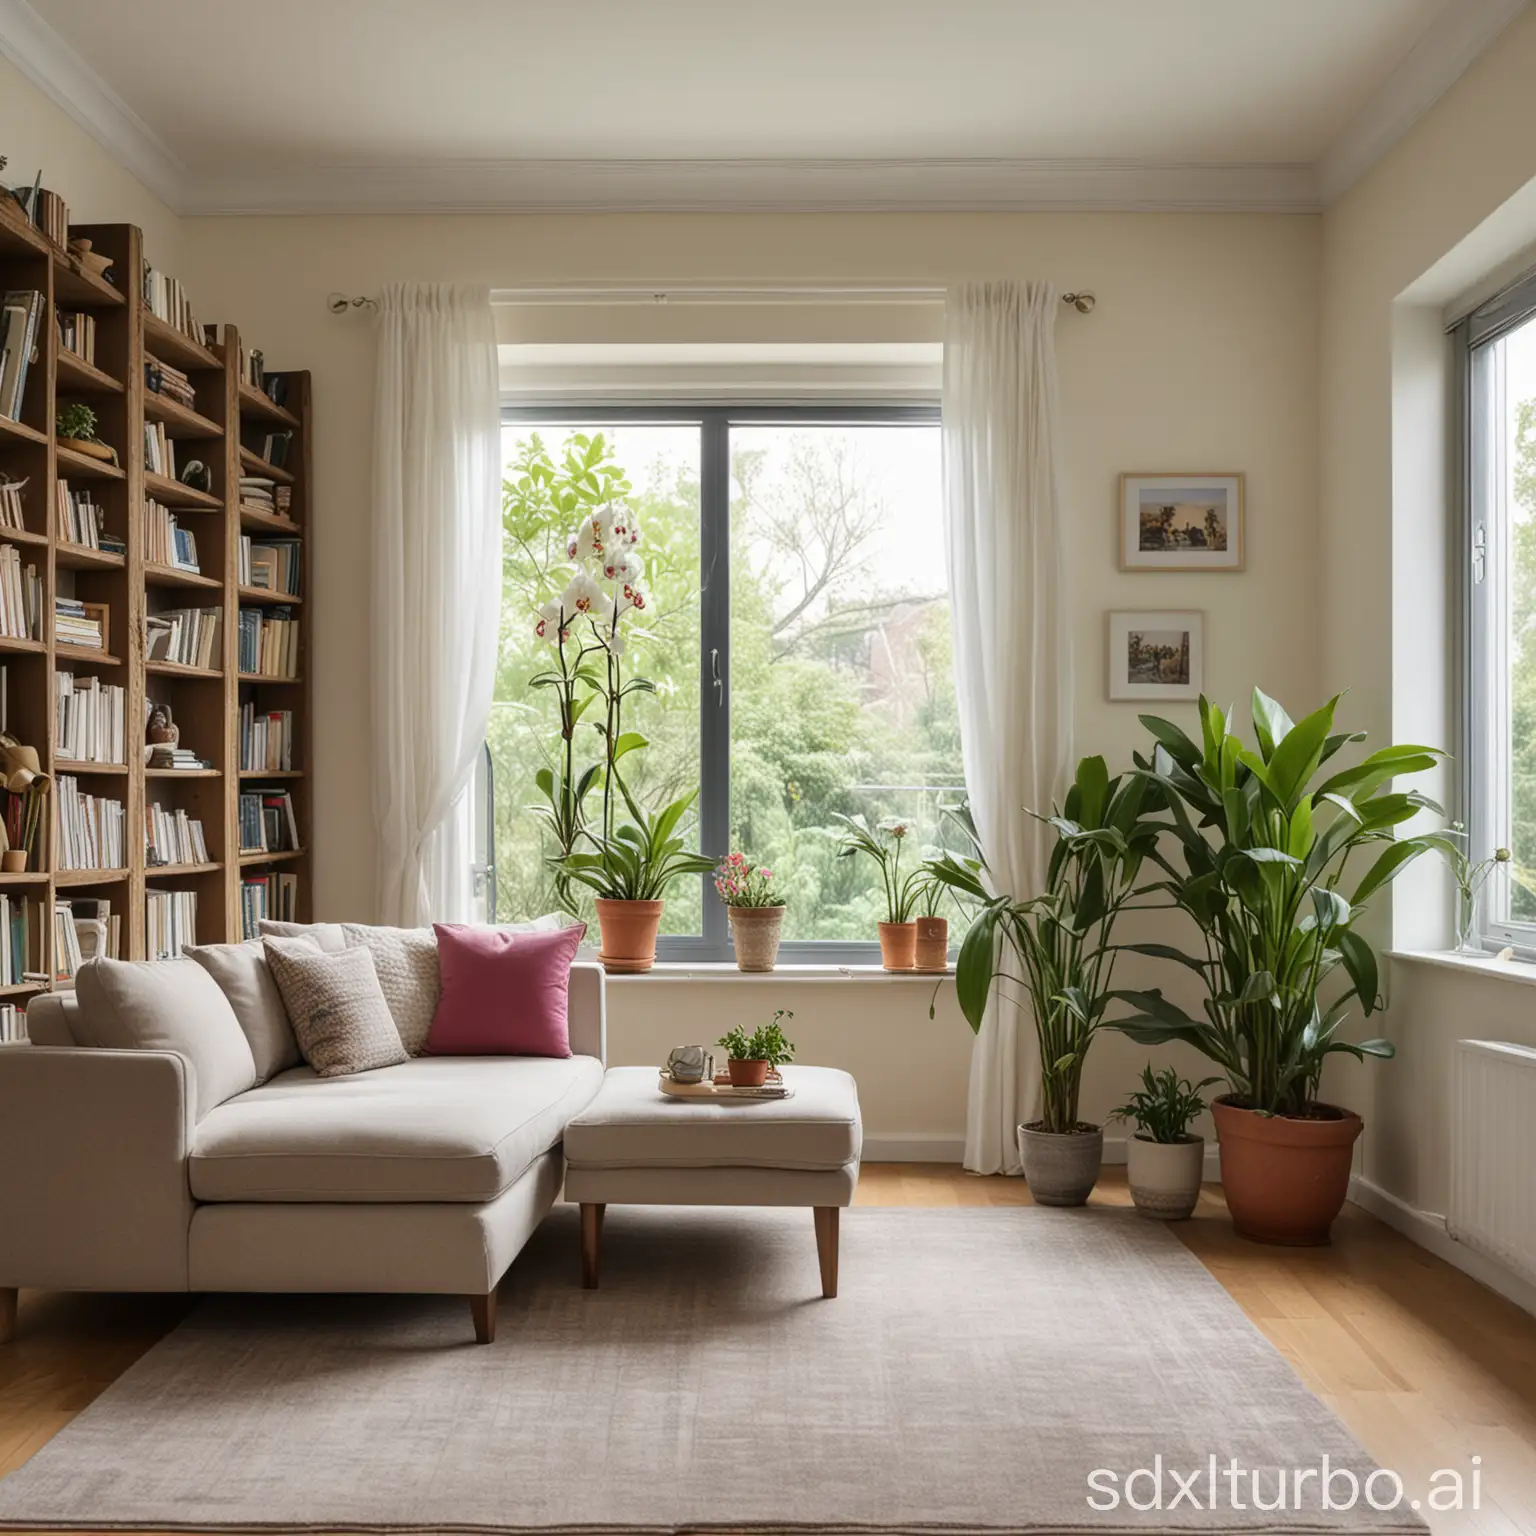 In the living room there are a sofa, a carpet, a bookcase, and by the window, a rectangular flower pot with an orchid plant.